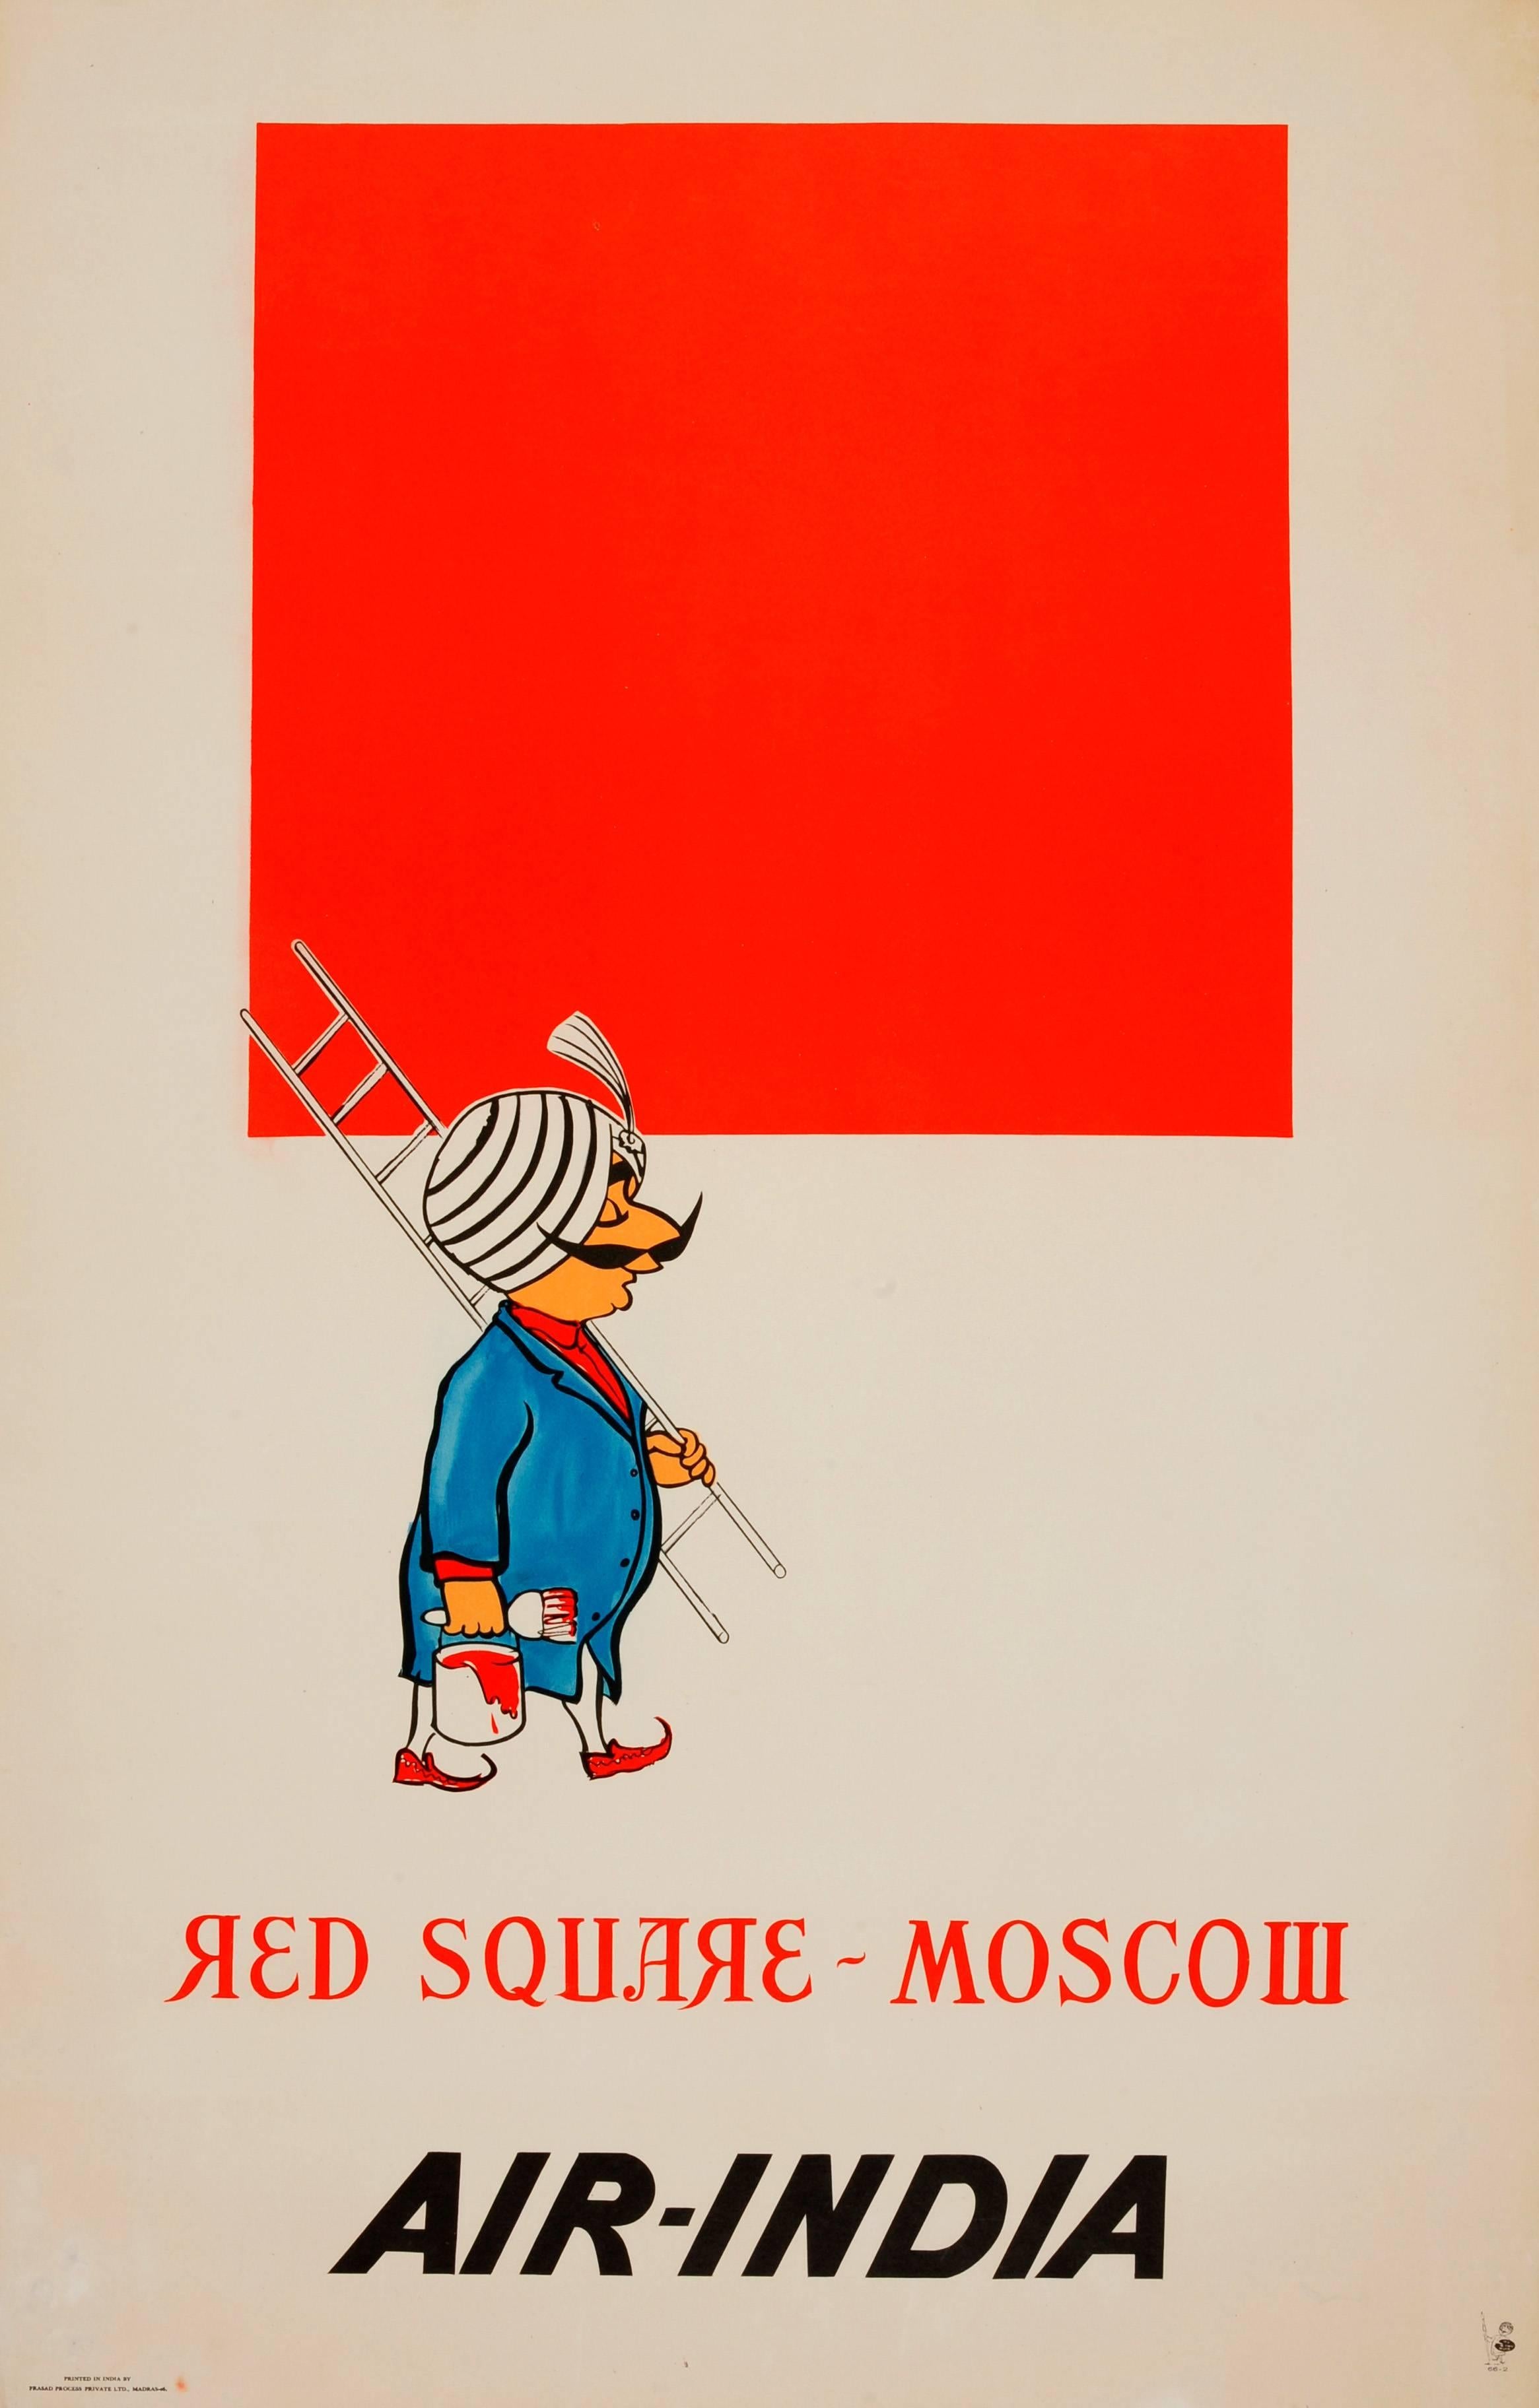 Unknown Print - Rare Original Vintage Malevich Style Air India Travel Poster - Red Square Moscow